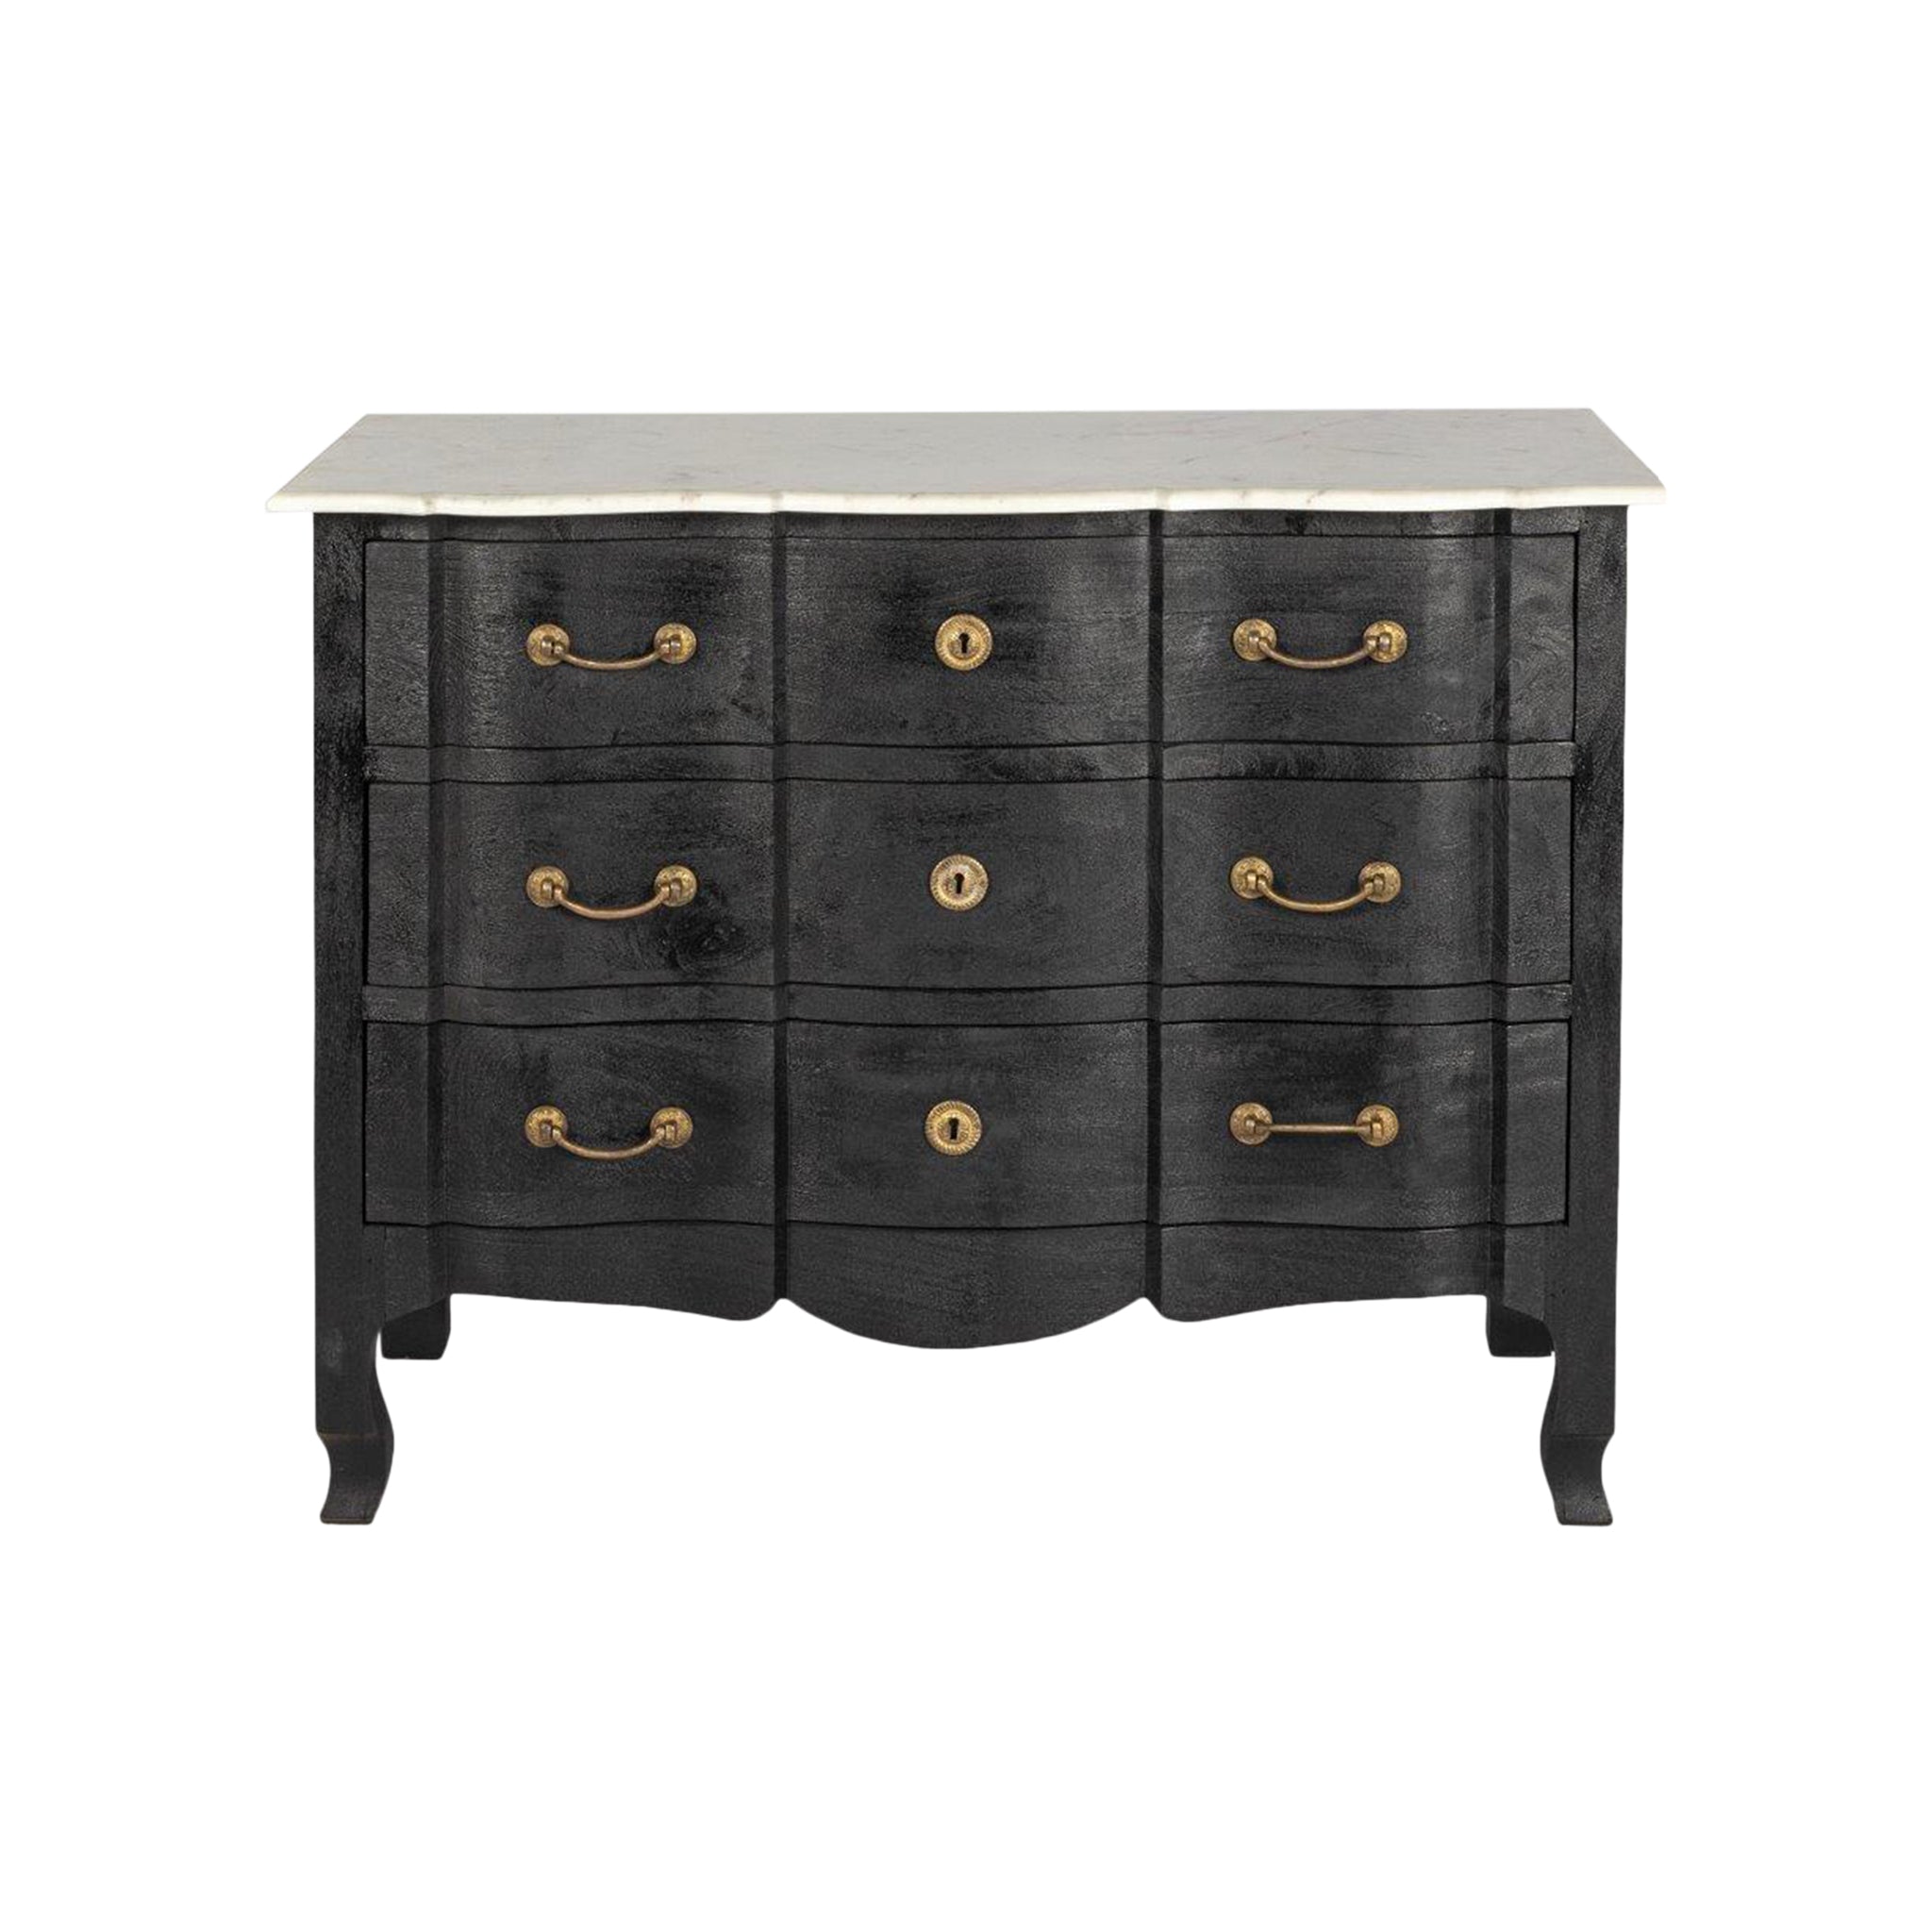 Front View of the Black Serpentine Chest with Marble Top on White Background